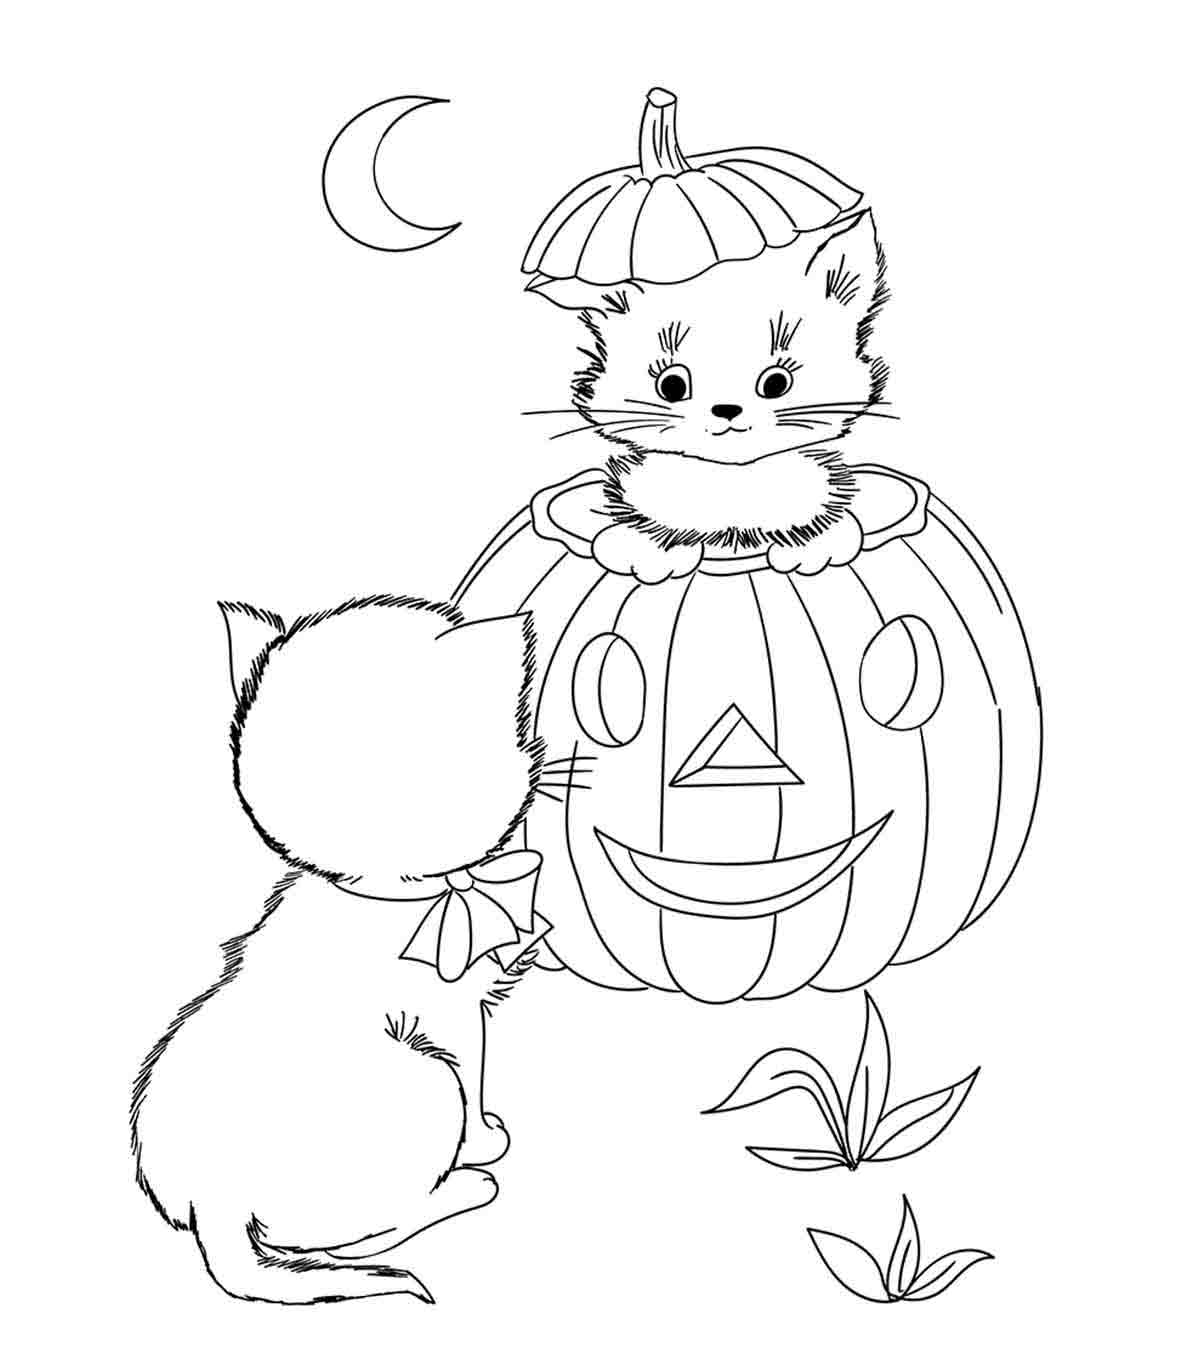 25 Amazing Disney Halloween Coloring Pages For Your Little Ones